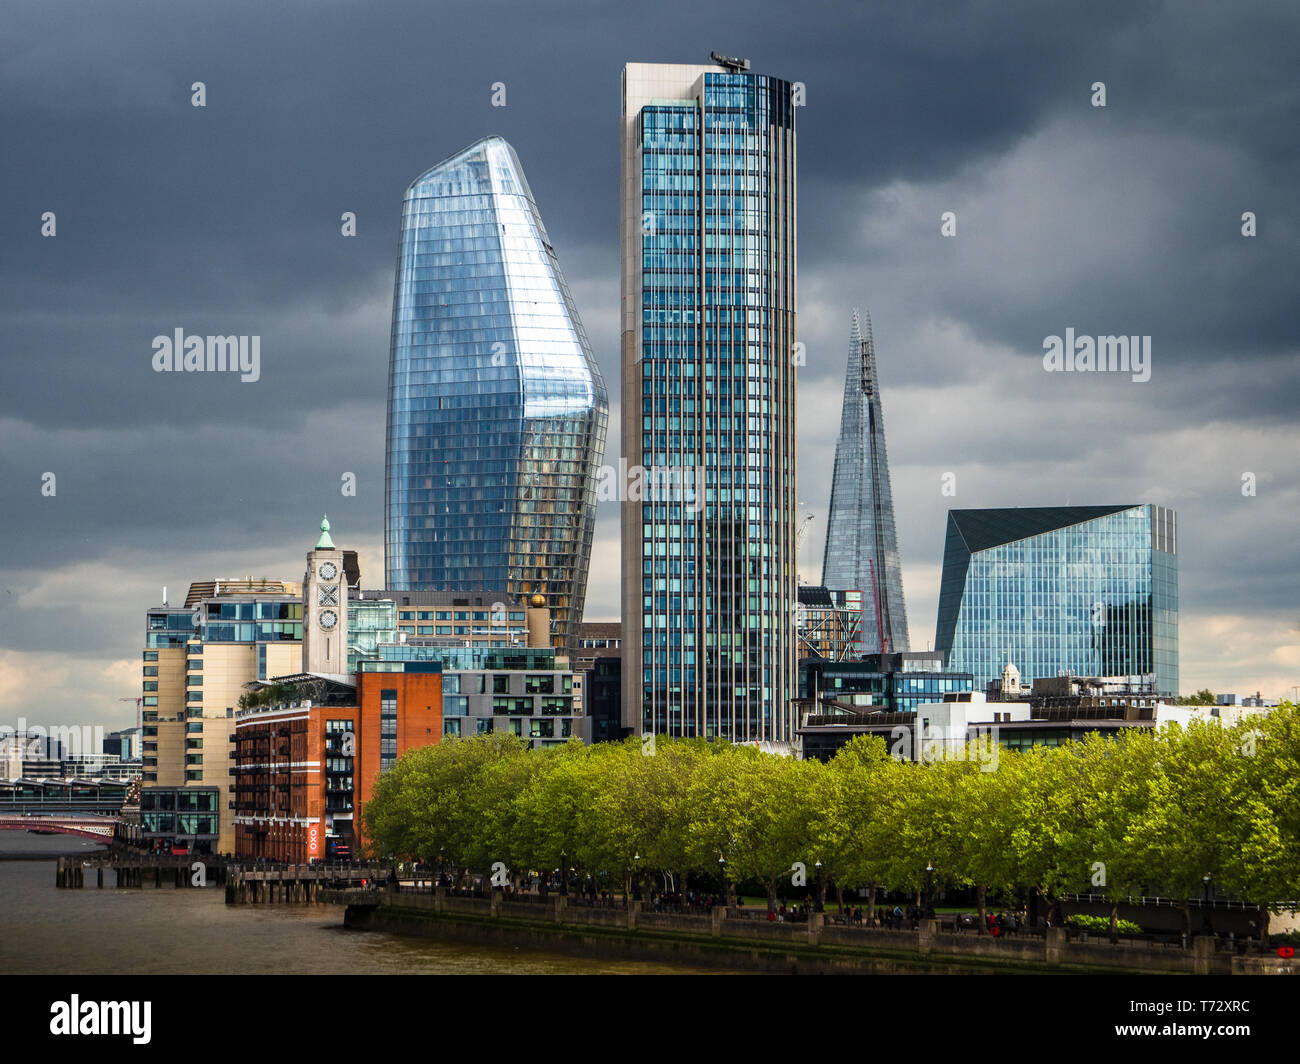 London Southbank Skyline - South Bank skyline including the Oxo Tower, the South Bank Tower, One Blackfriars and the Shard Stock Photo